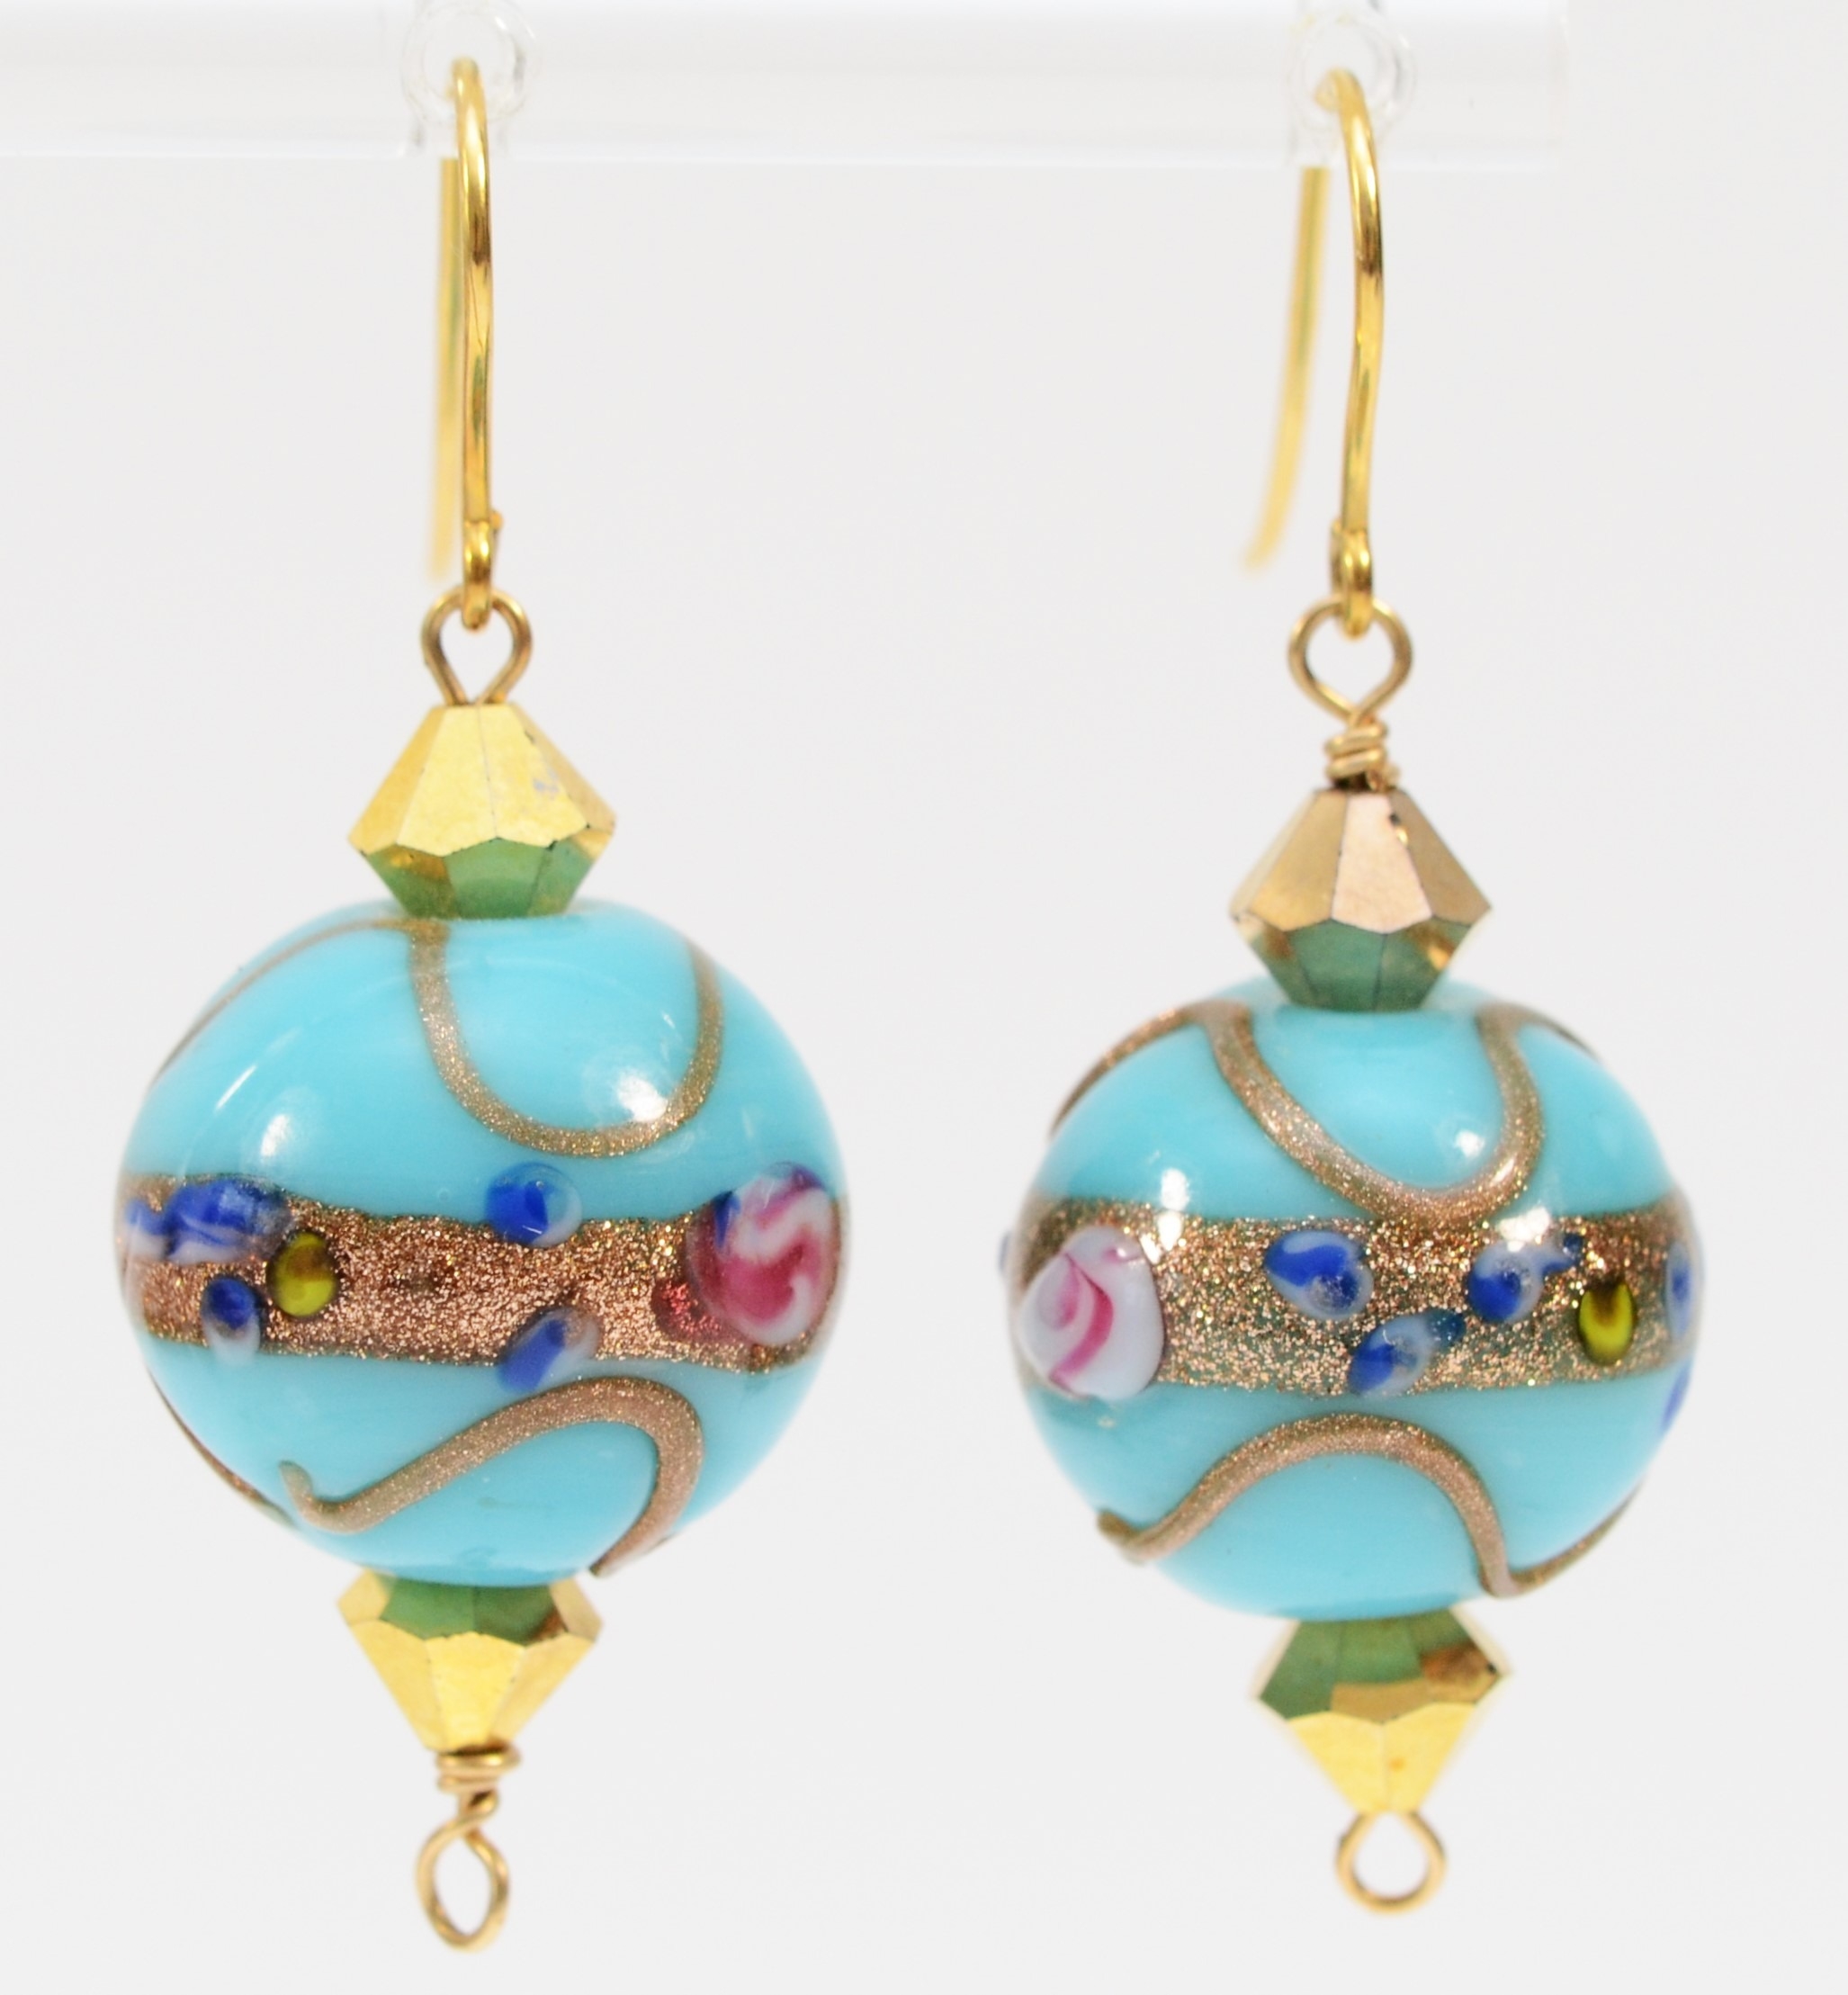 A 9ct gold mounted pair of 15mm glass bead ear rings